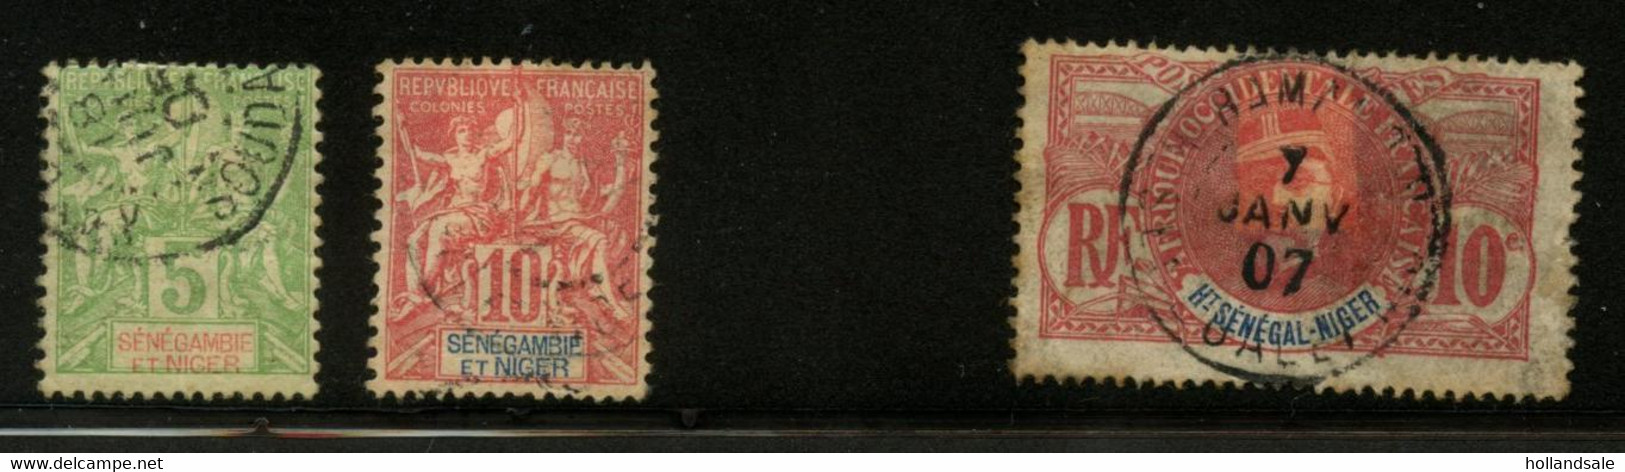 SENEGAL & NIGER - Stanle Gibbons #25, 26, 39. Used. - Used Stamps